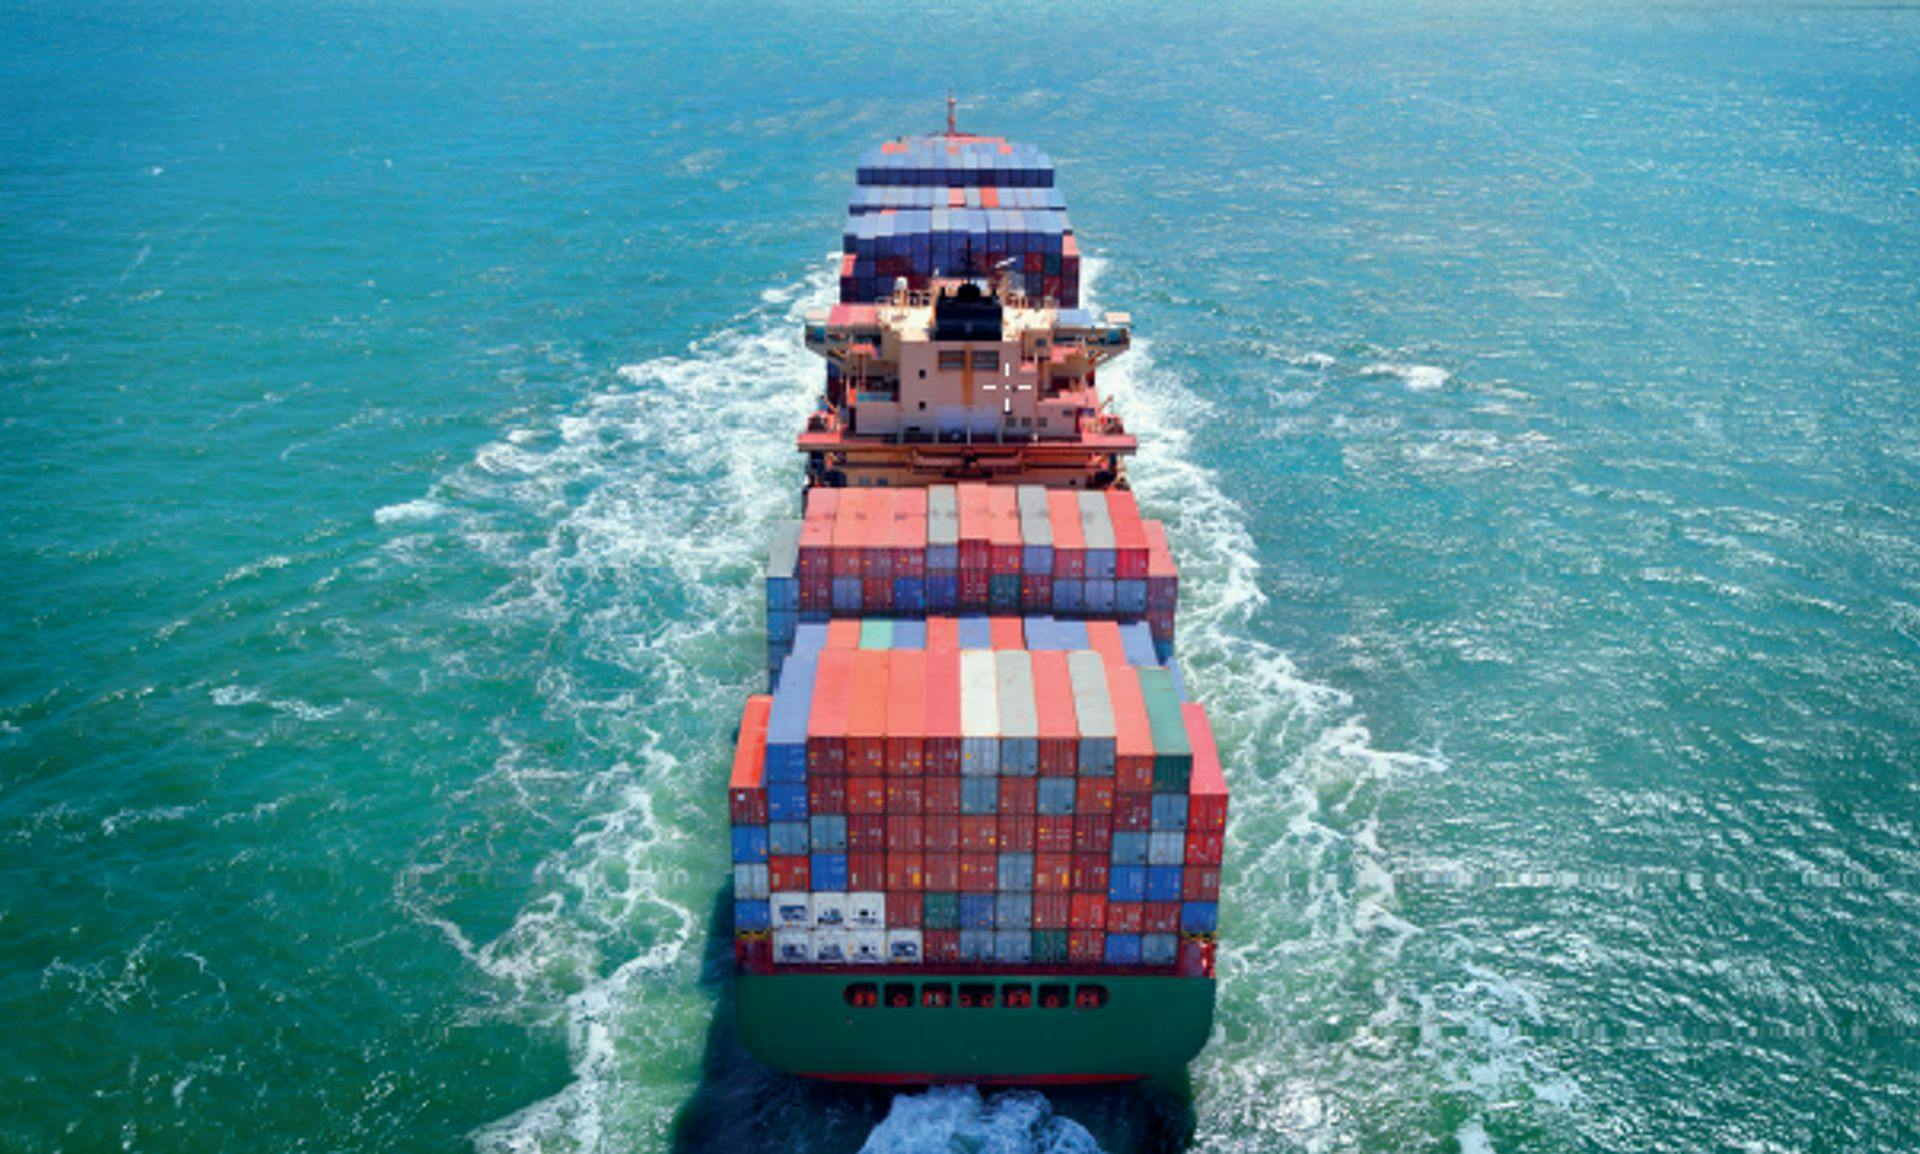 Large commercial container ship moving through the ocean.